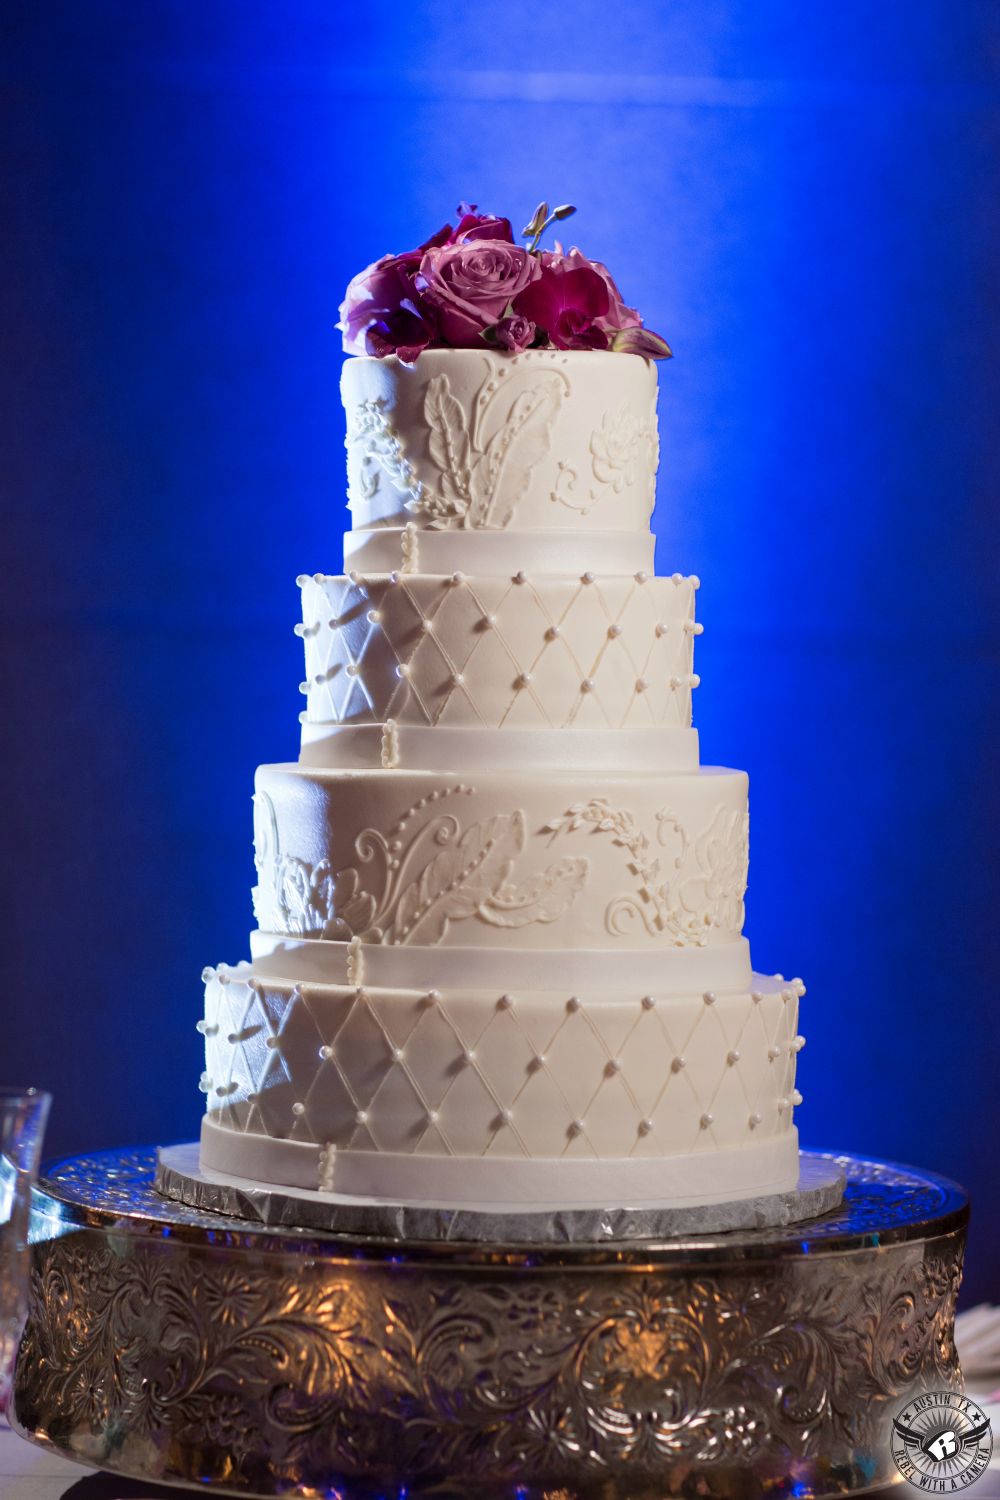 Four tier white bridal wedding cake by The Cake Plate in Austin at the Grand Ballroom at 1900 University Avenue coordinated by Barbara's Brides with royal blue uplighting and magenta floral cake topper by Wendee Sawran Austin event designer at wedding reception.